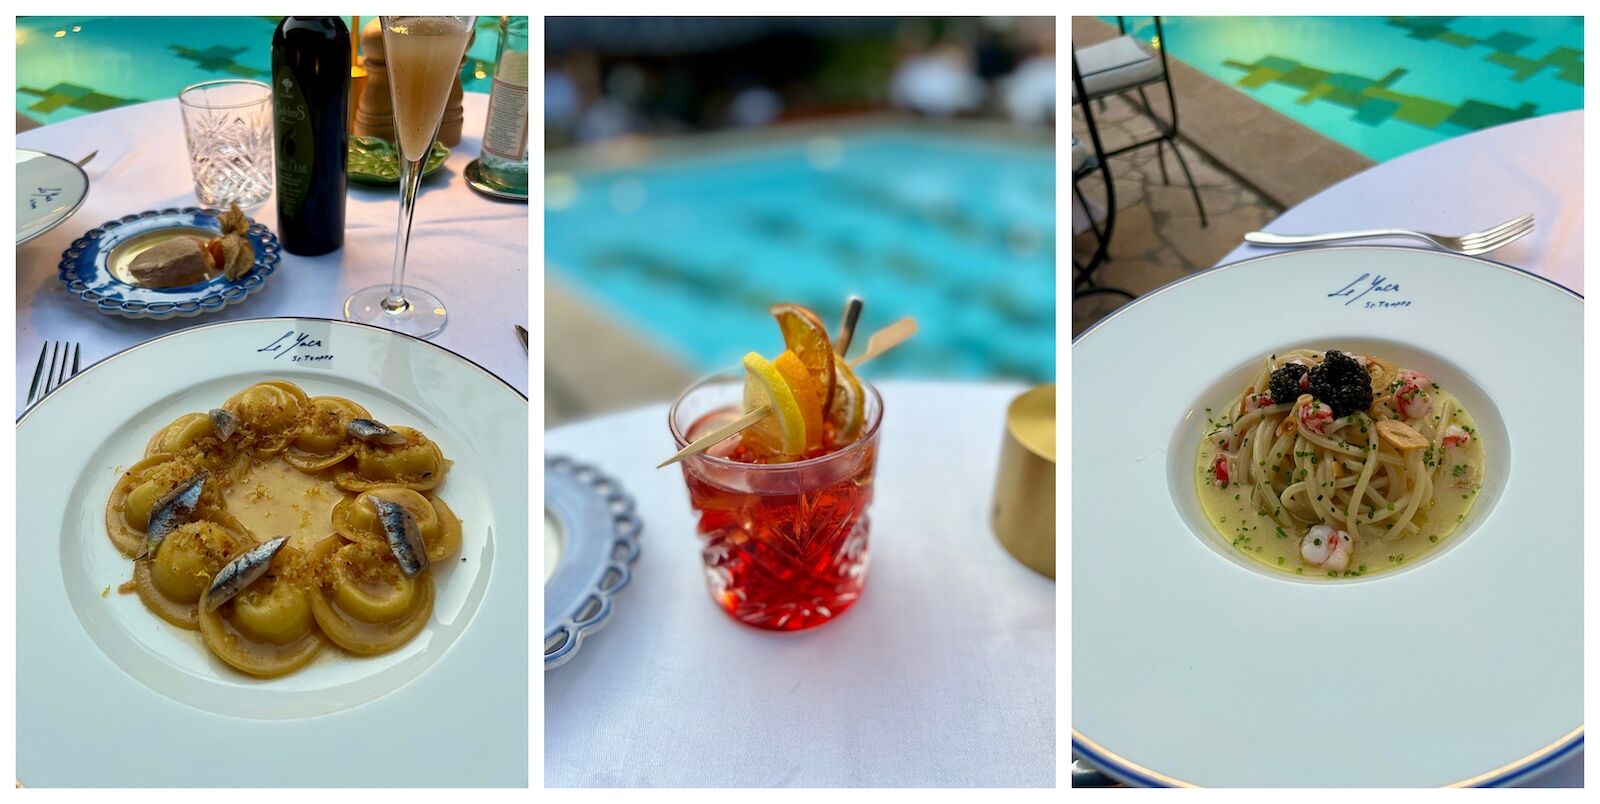 Dishes and drinks served at the St. Tropez restaurant Le Yaca